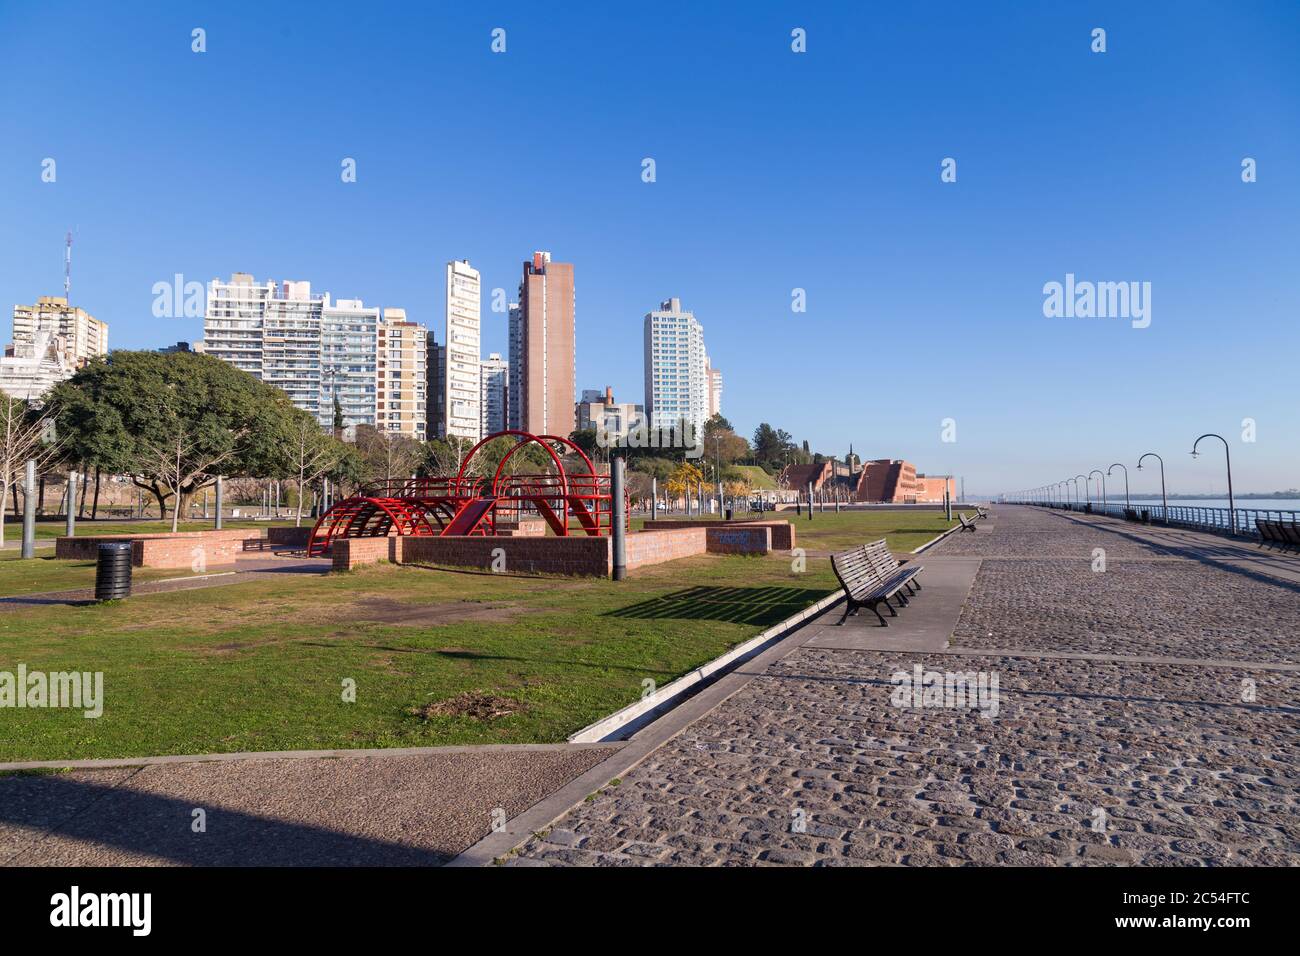 ROSARIO, ARGENTINA - JULY 6, 2019: Spain Park placed at the coast of Parana river in Rosario. Panoramic view. The city at the background. Stock Photo